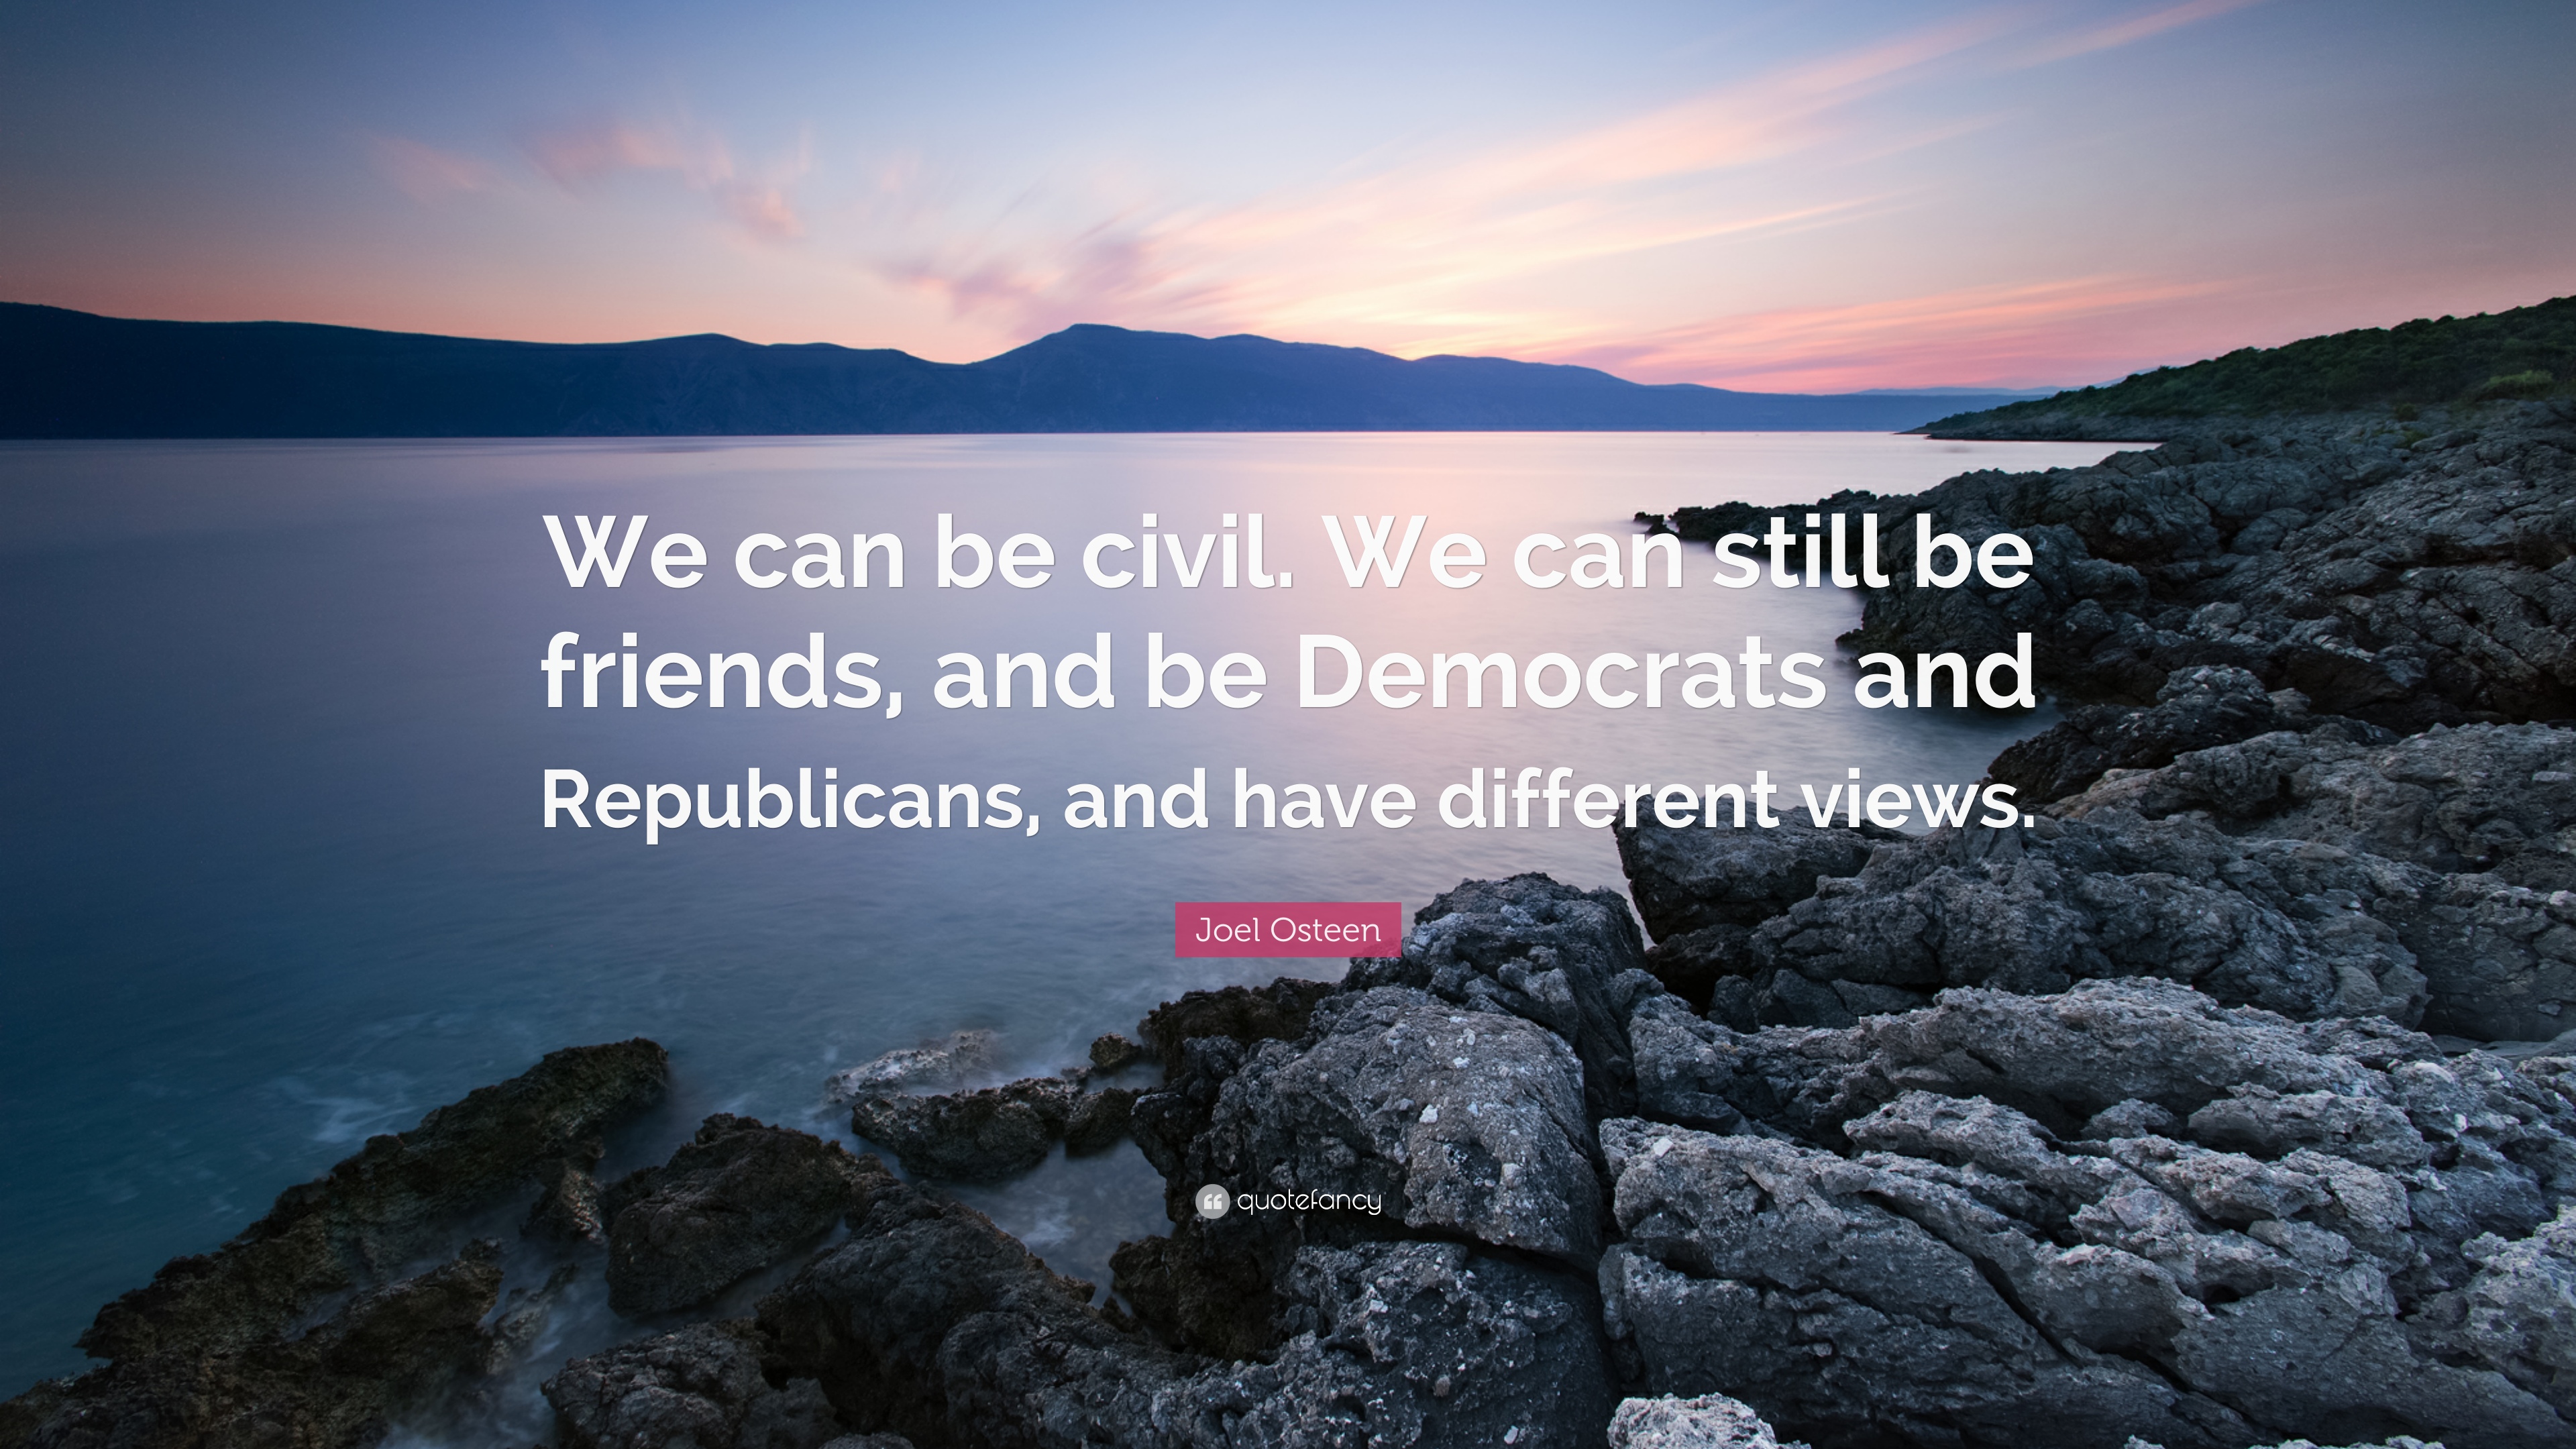 Joel Osteen Quote: “We can be civil. We can still be friends